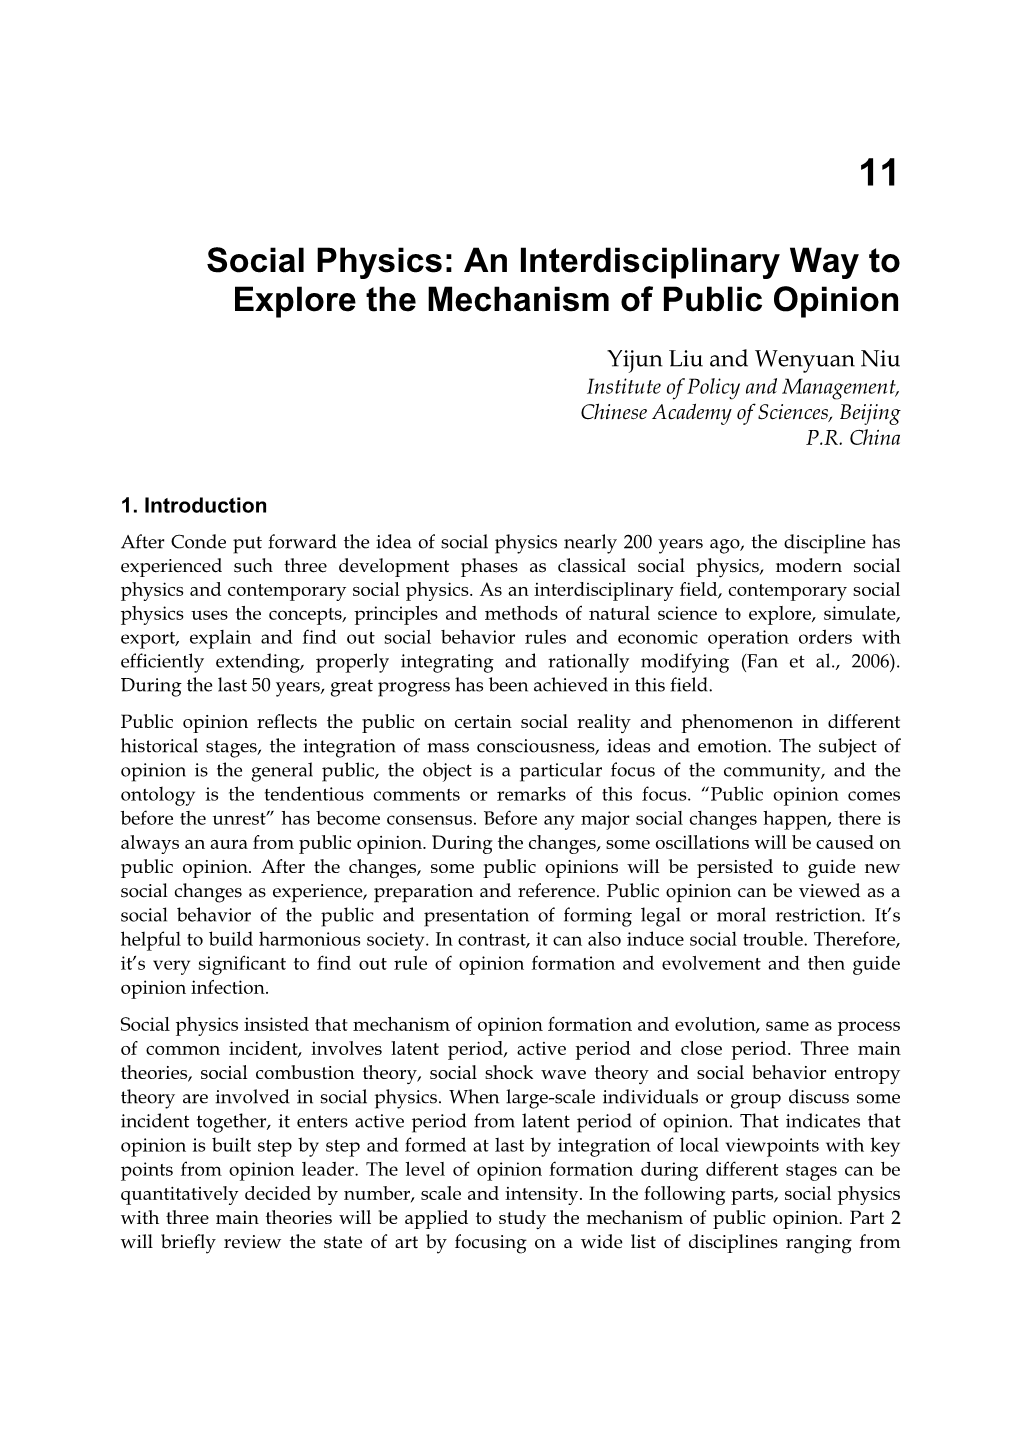 Social Physics: an Interdisciplinary Way to Explore the Mechanism of Public Opinion